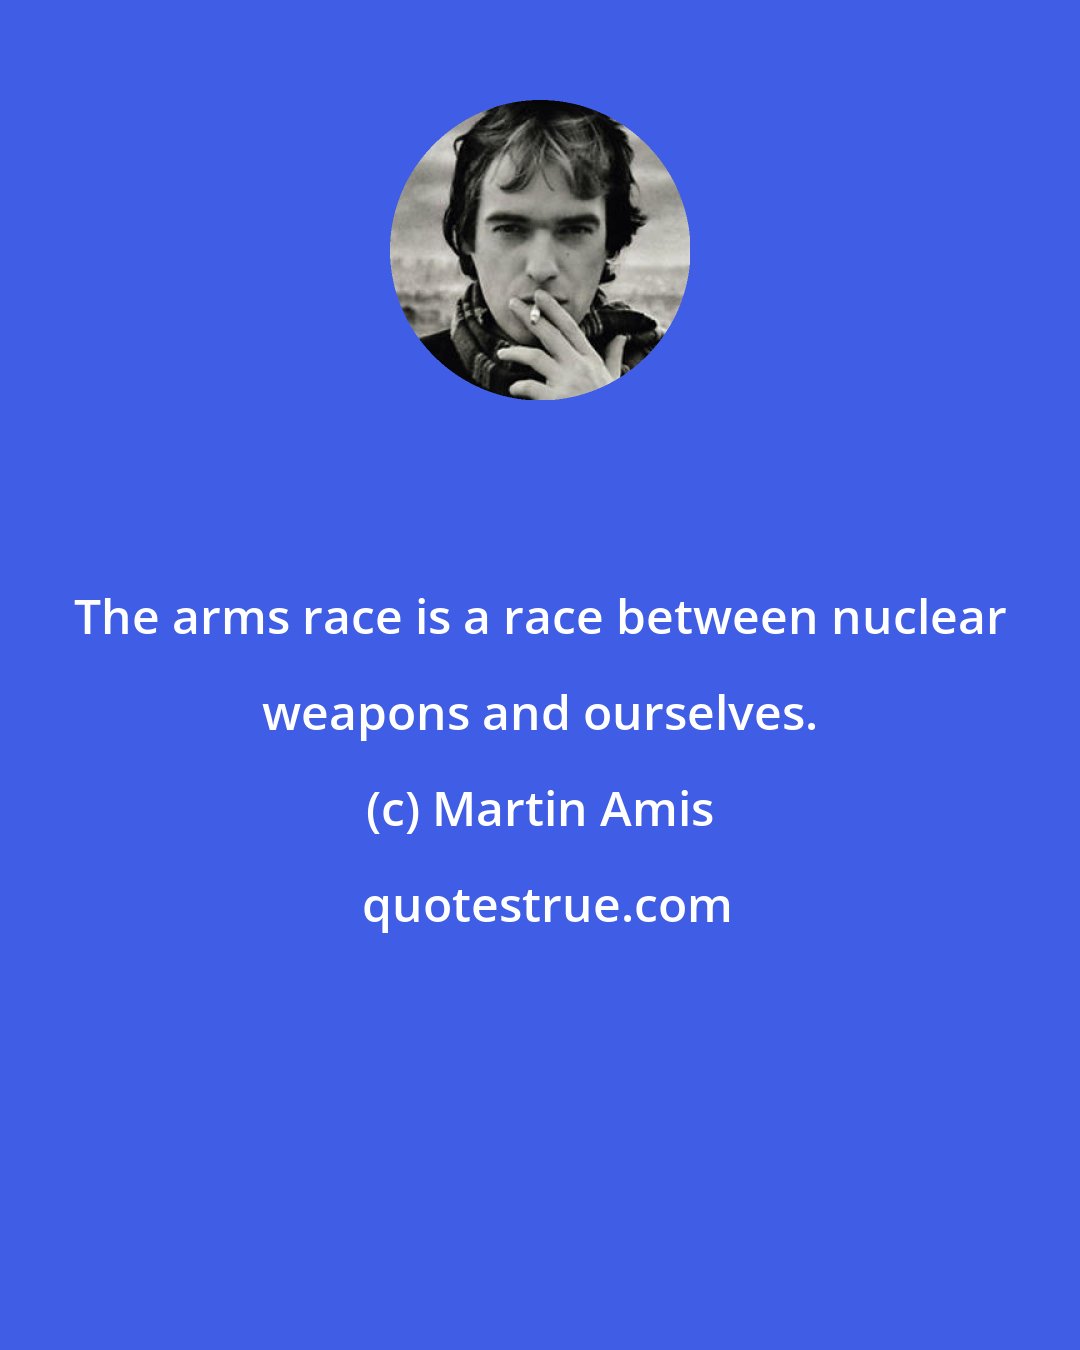 Martin Amis: The arms race is a race between nuclear weapons and ourselves.